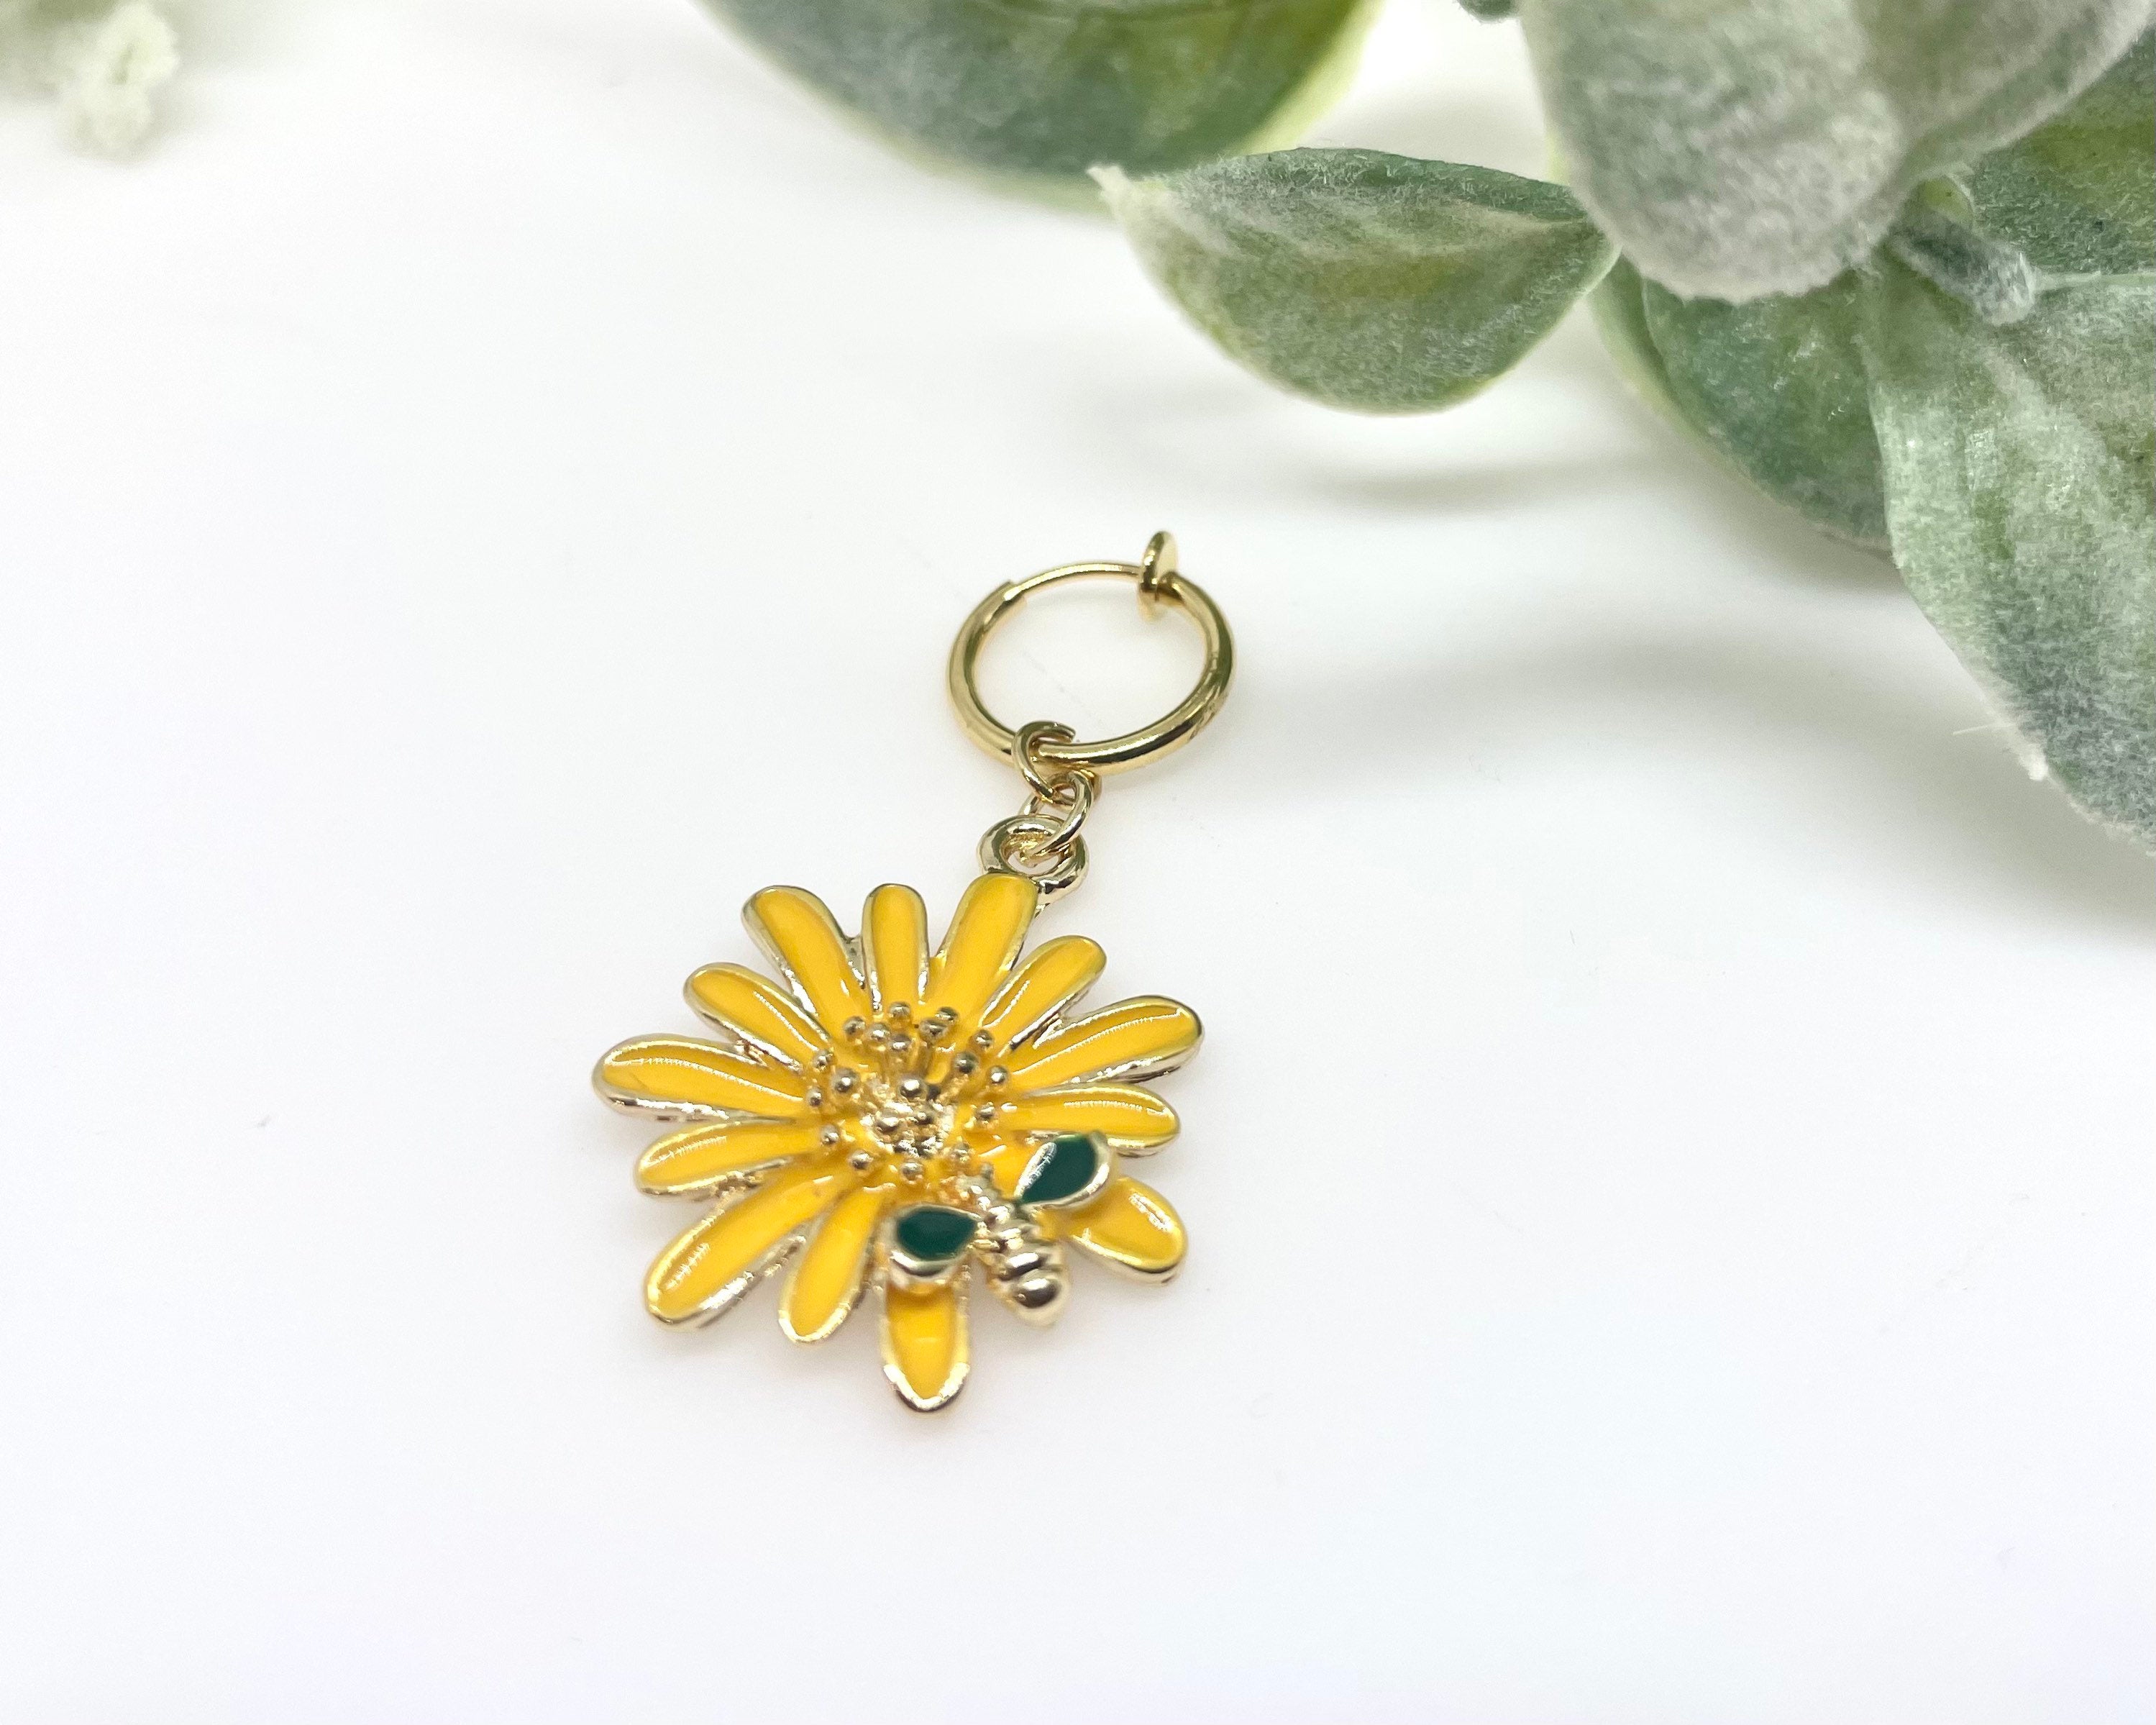 Clip on Belly Ring - Fake Piercing - Flower Belly Ring